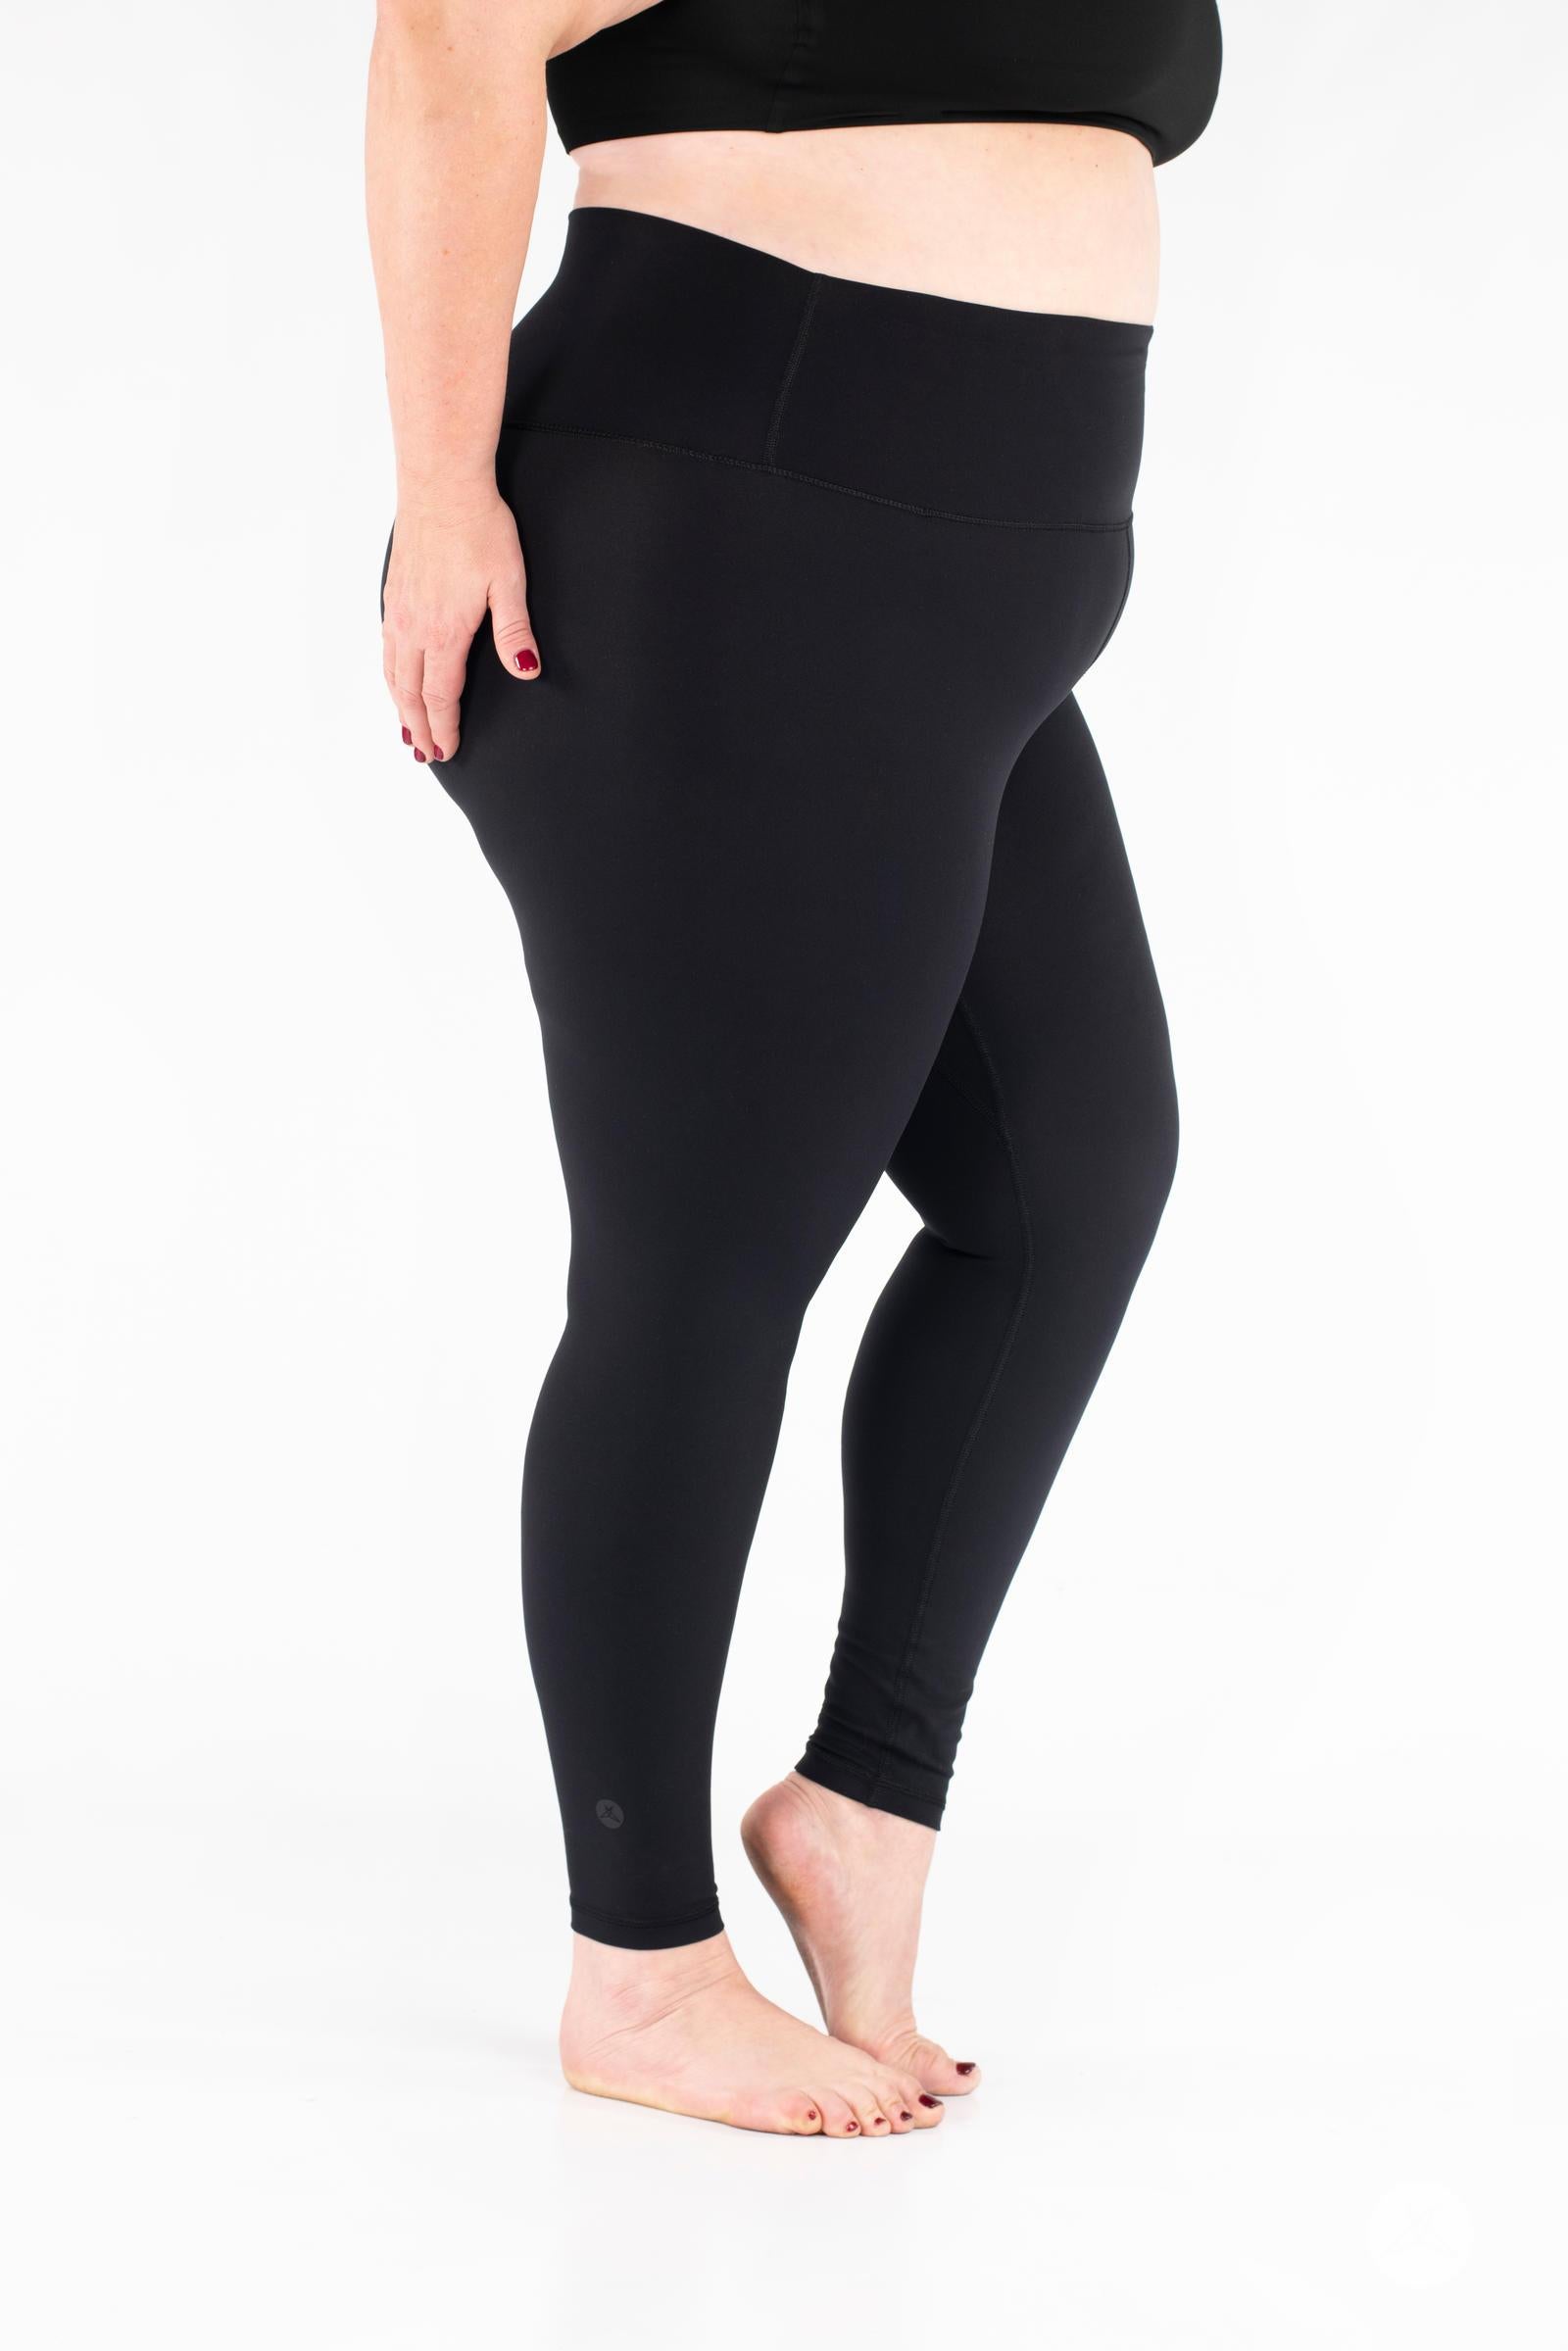 Black Compressive Leggings with Pockets That Don't Roll Down